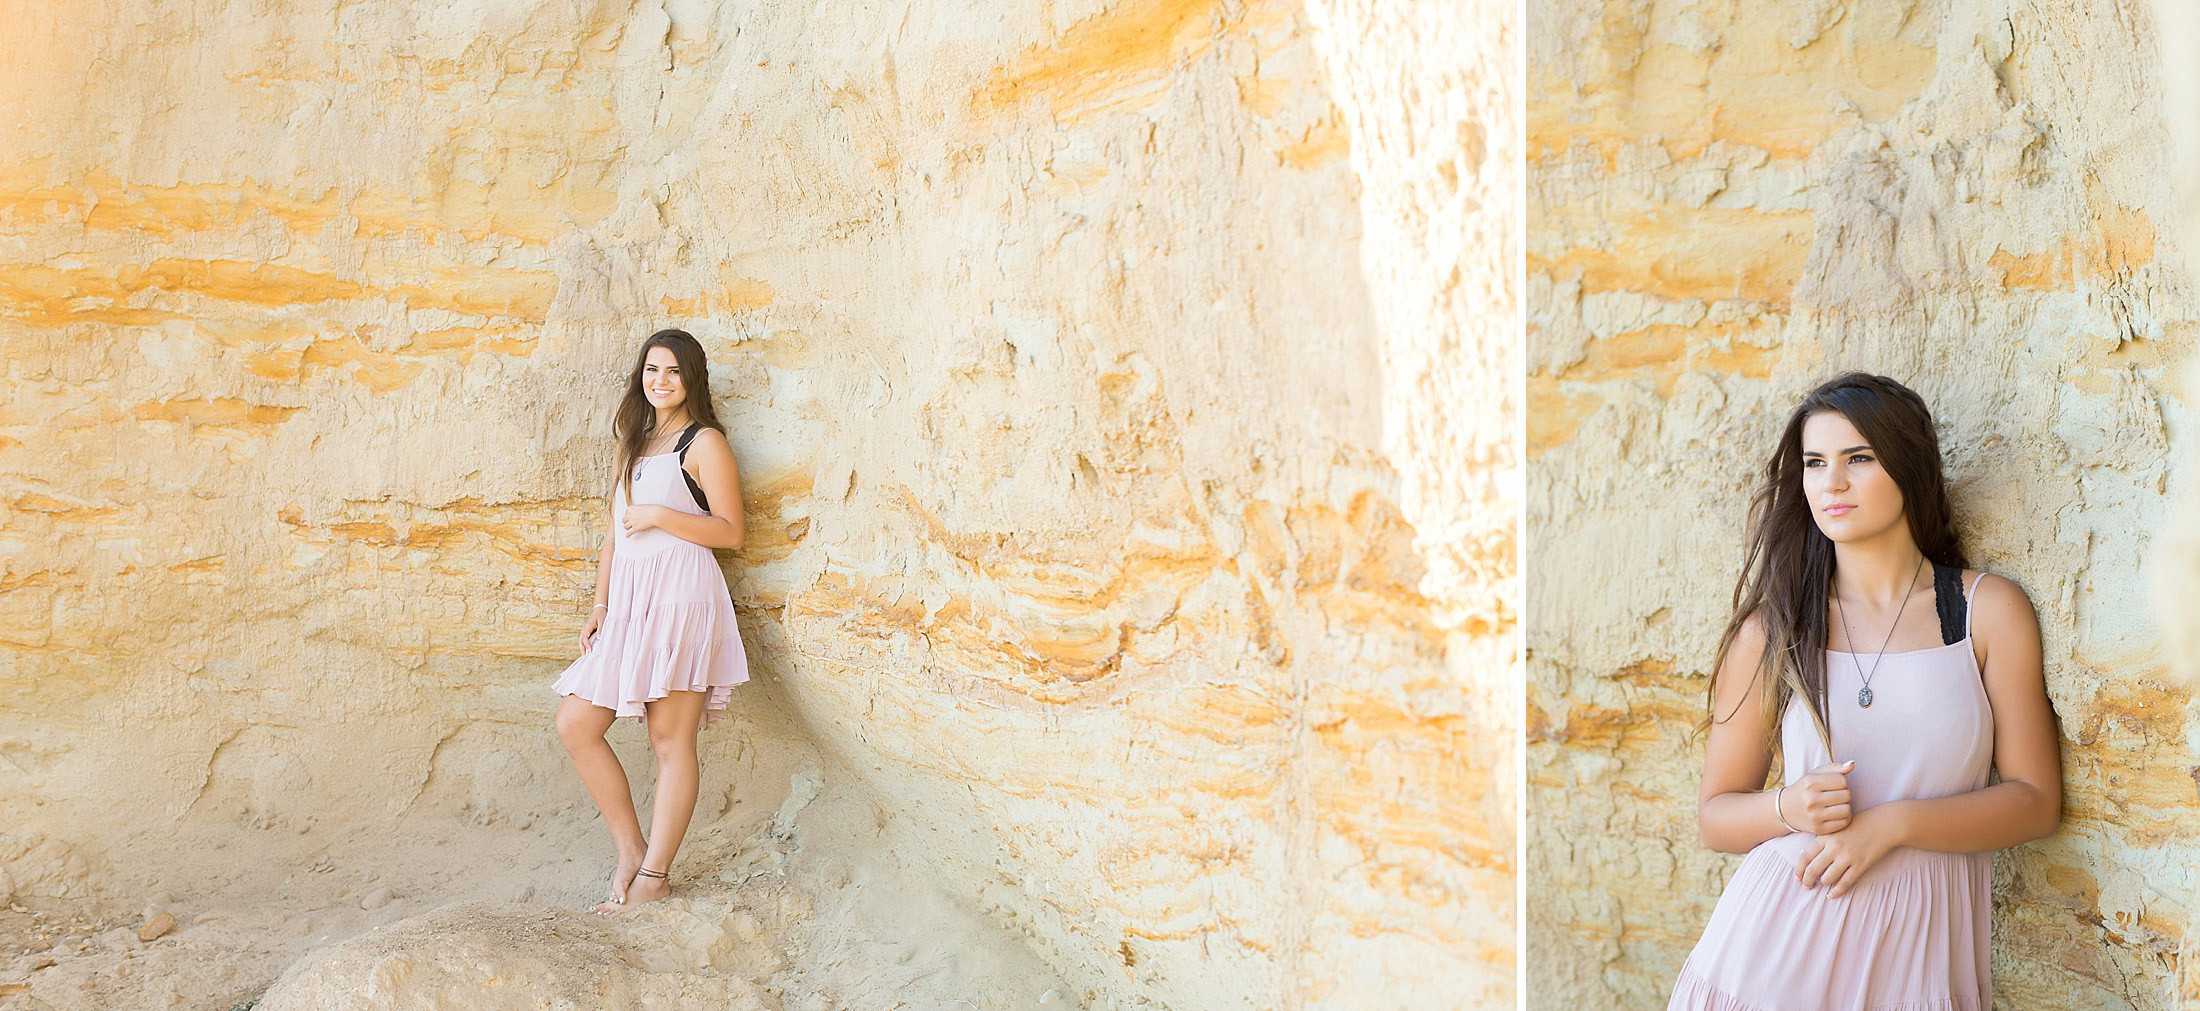 Senior Pictures at the beach in Southern California by Tara Rochelle